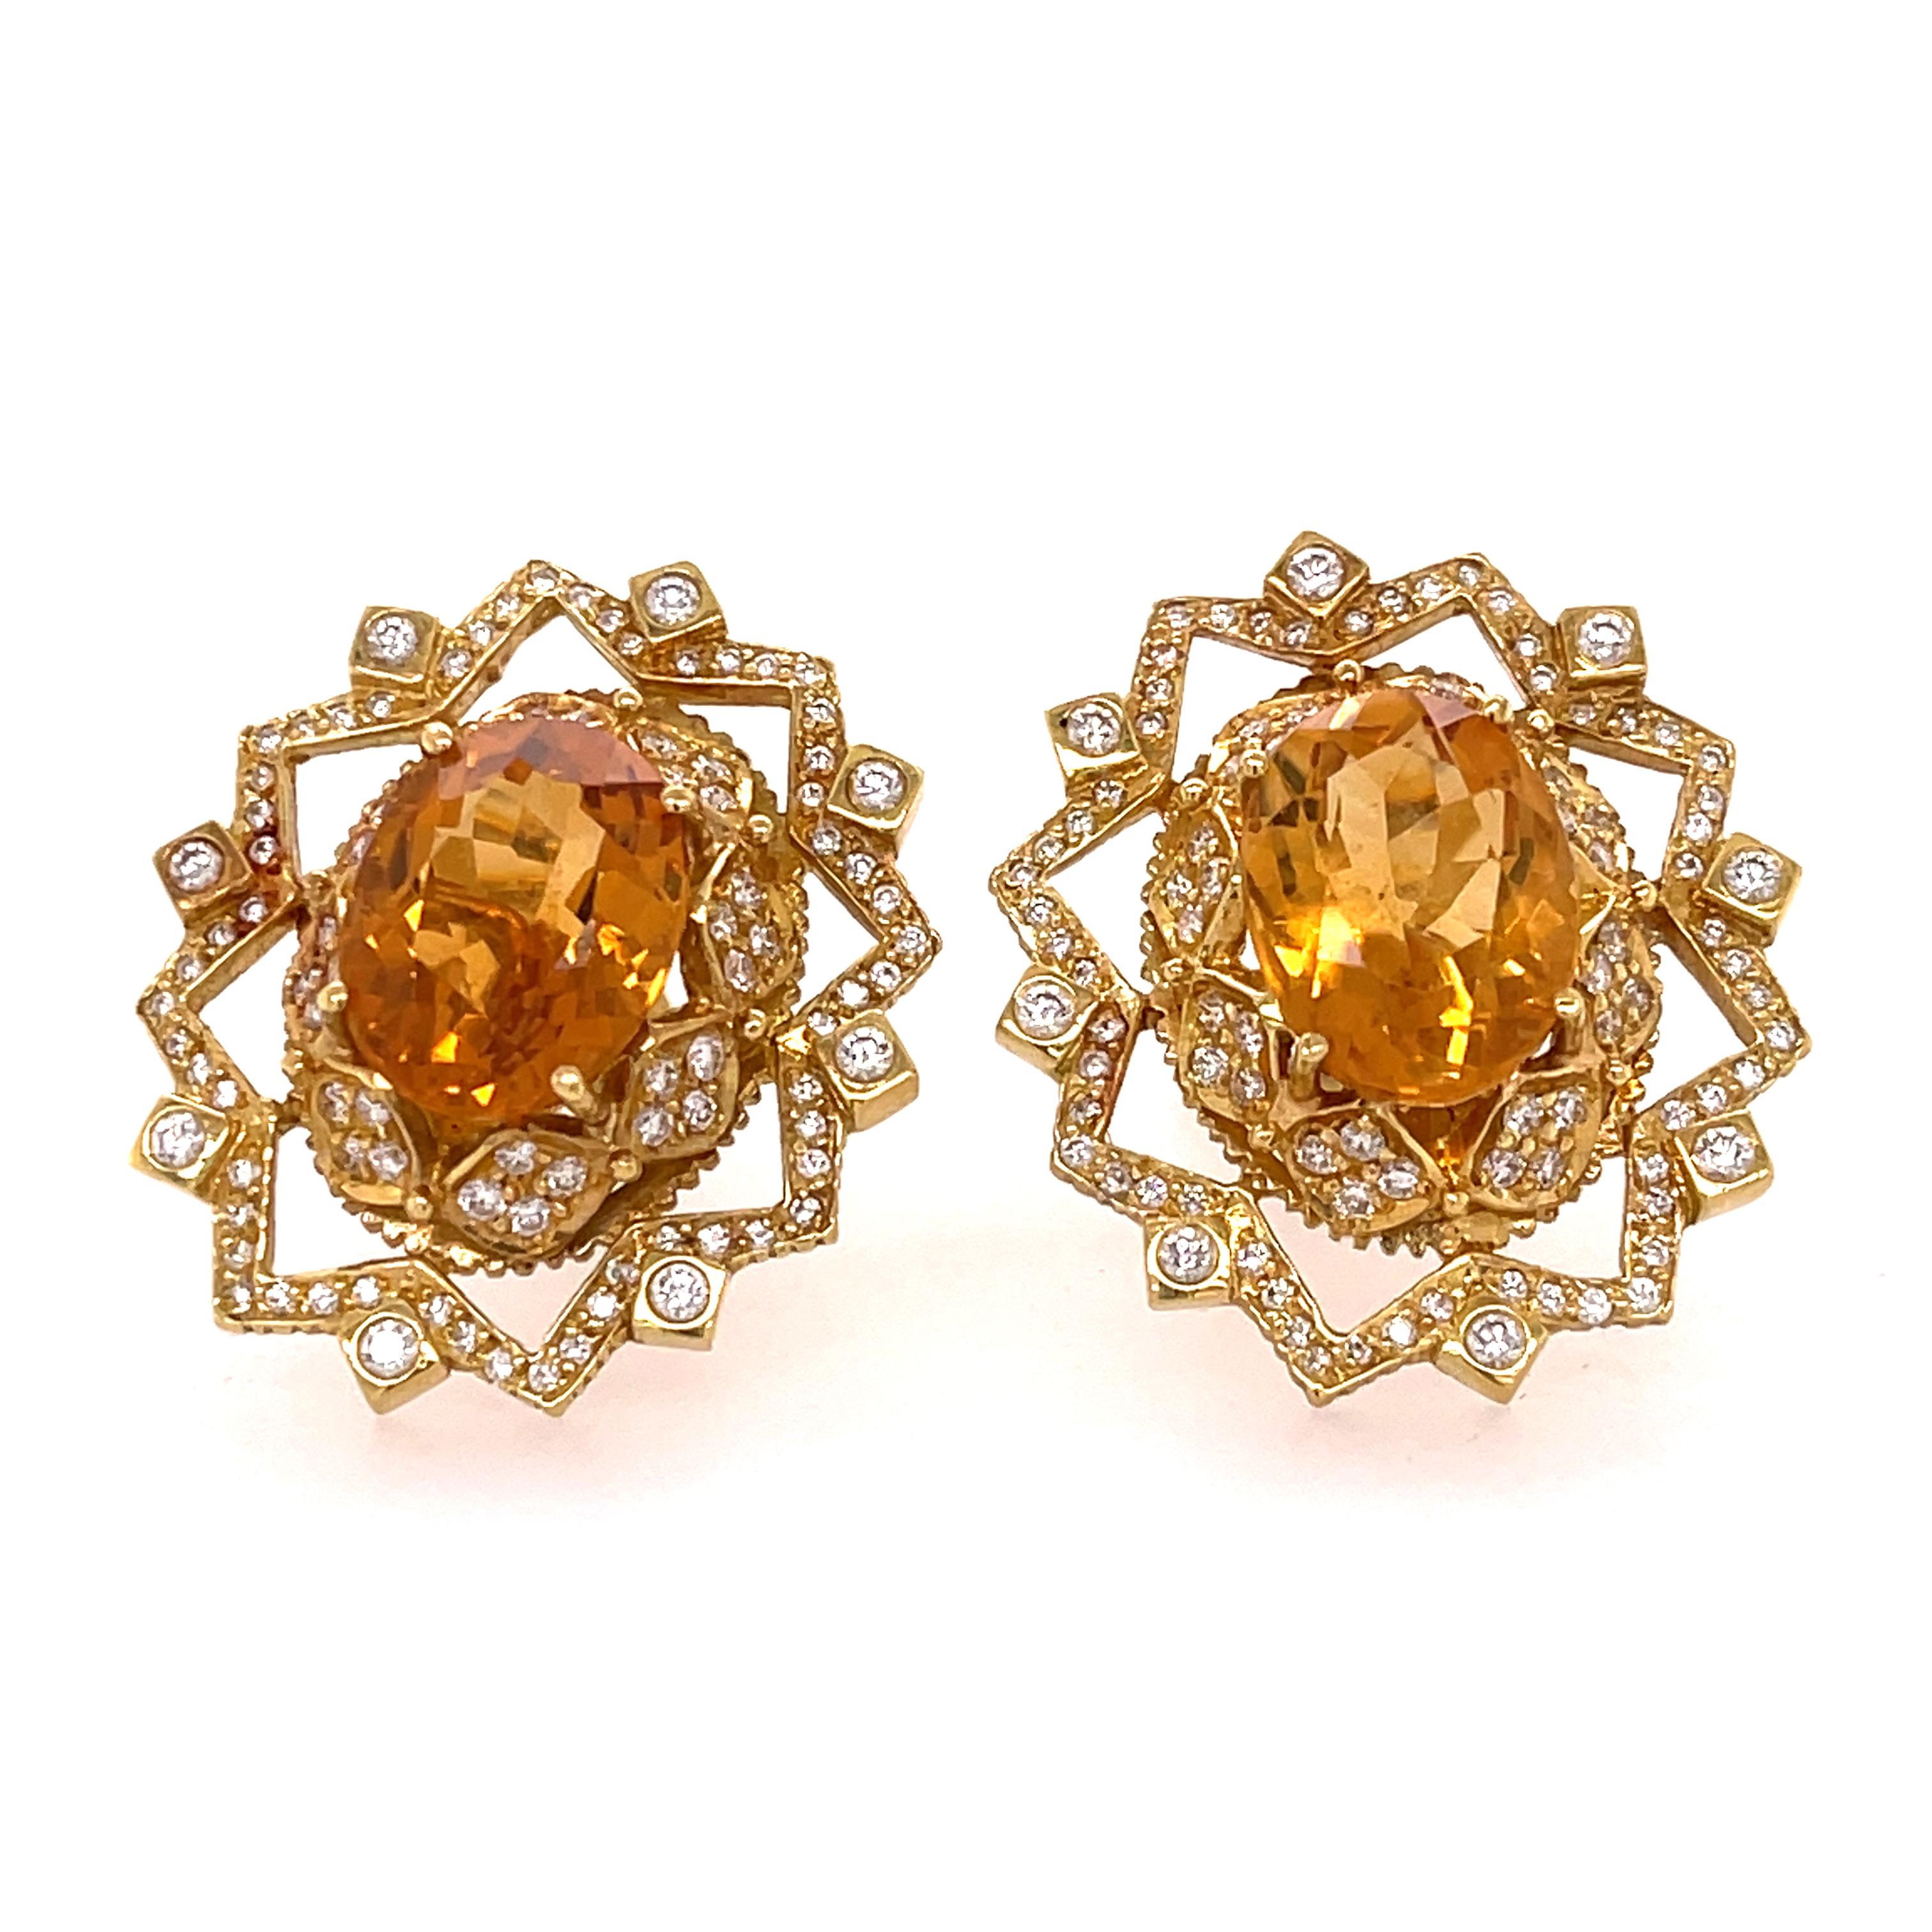 Doris Panos Citrine and Diamond Earring in 18K Yellow Gold. The earrings feature oval cut citrines and approximately 1.75ctw of diamonds. 